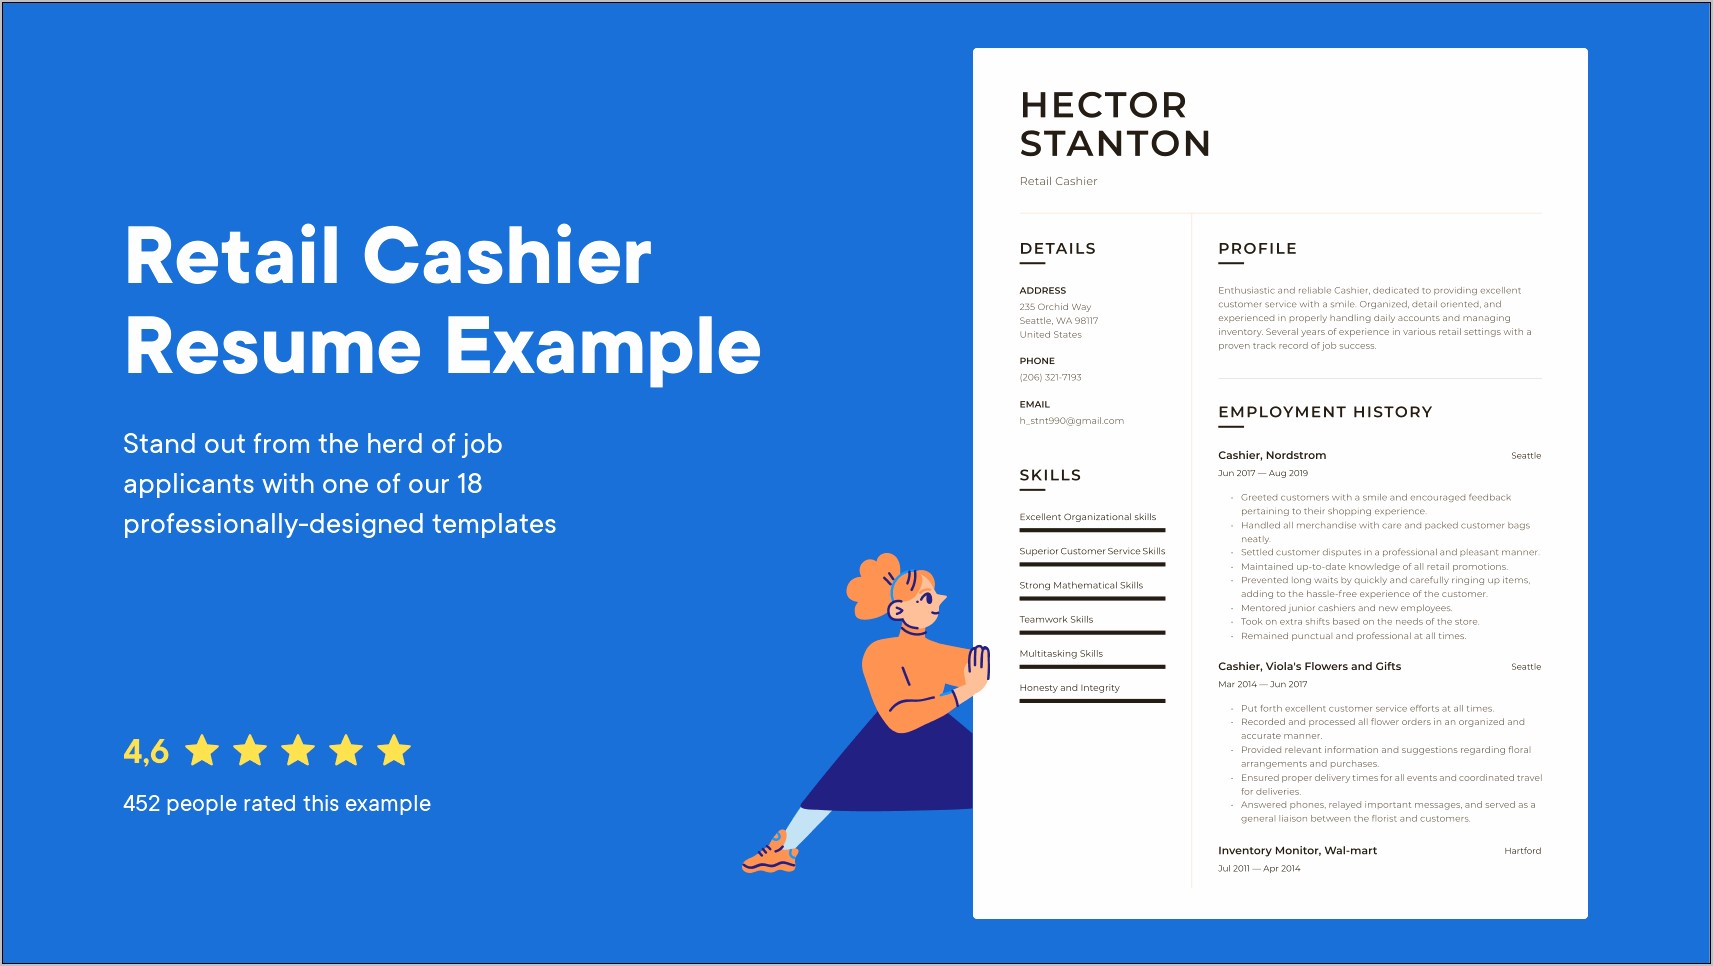 Resume Samples 2019 For Cashiers In A Store